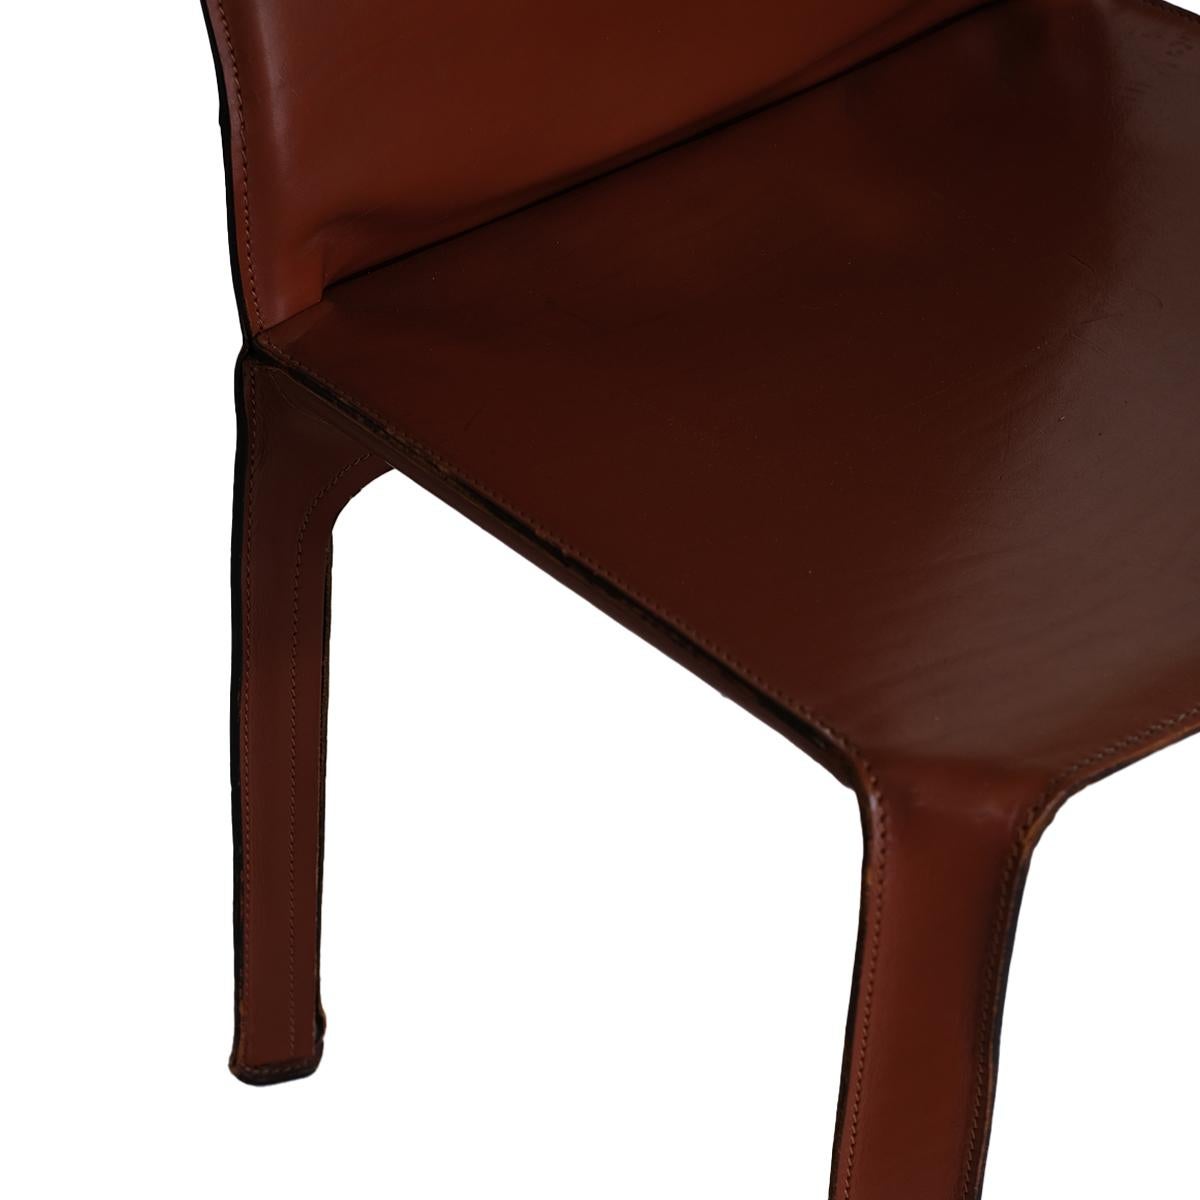 Introducing the Mario Bellini for Cassina CAB 412 Chairs in Opulent Leather: Enhance your living area with the epitome of Italian ingenuity and craftsmanship - the Mario Bellini Cassina CAB 412 chairs draped in lavish leather. These chairs transcend